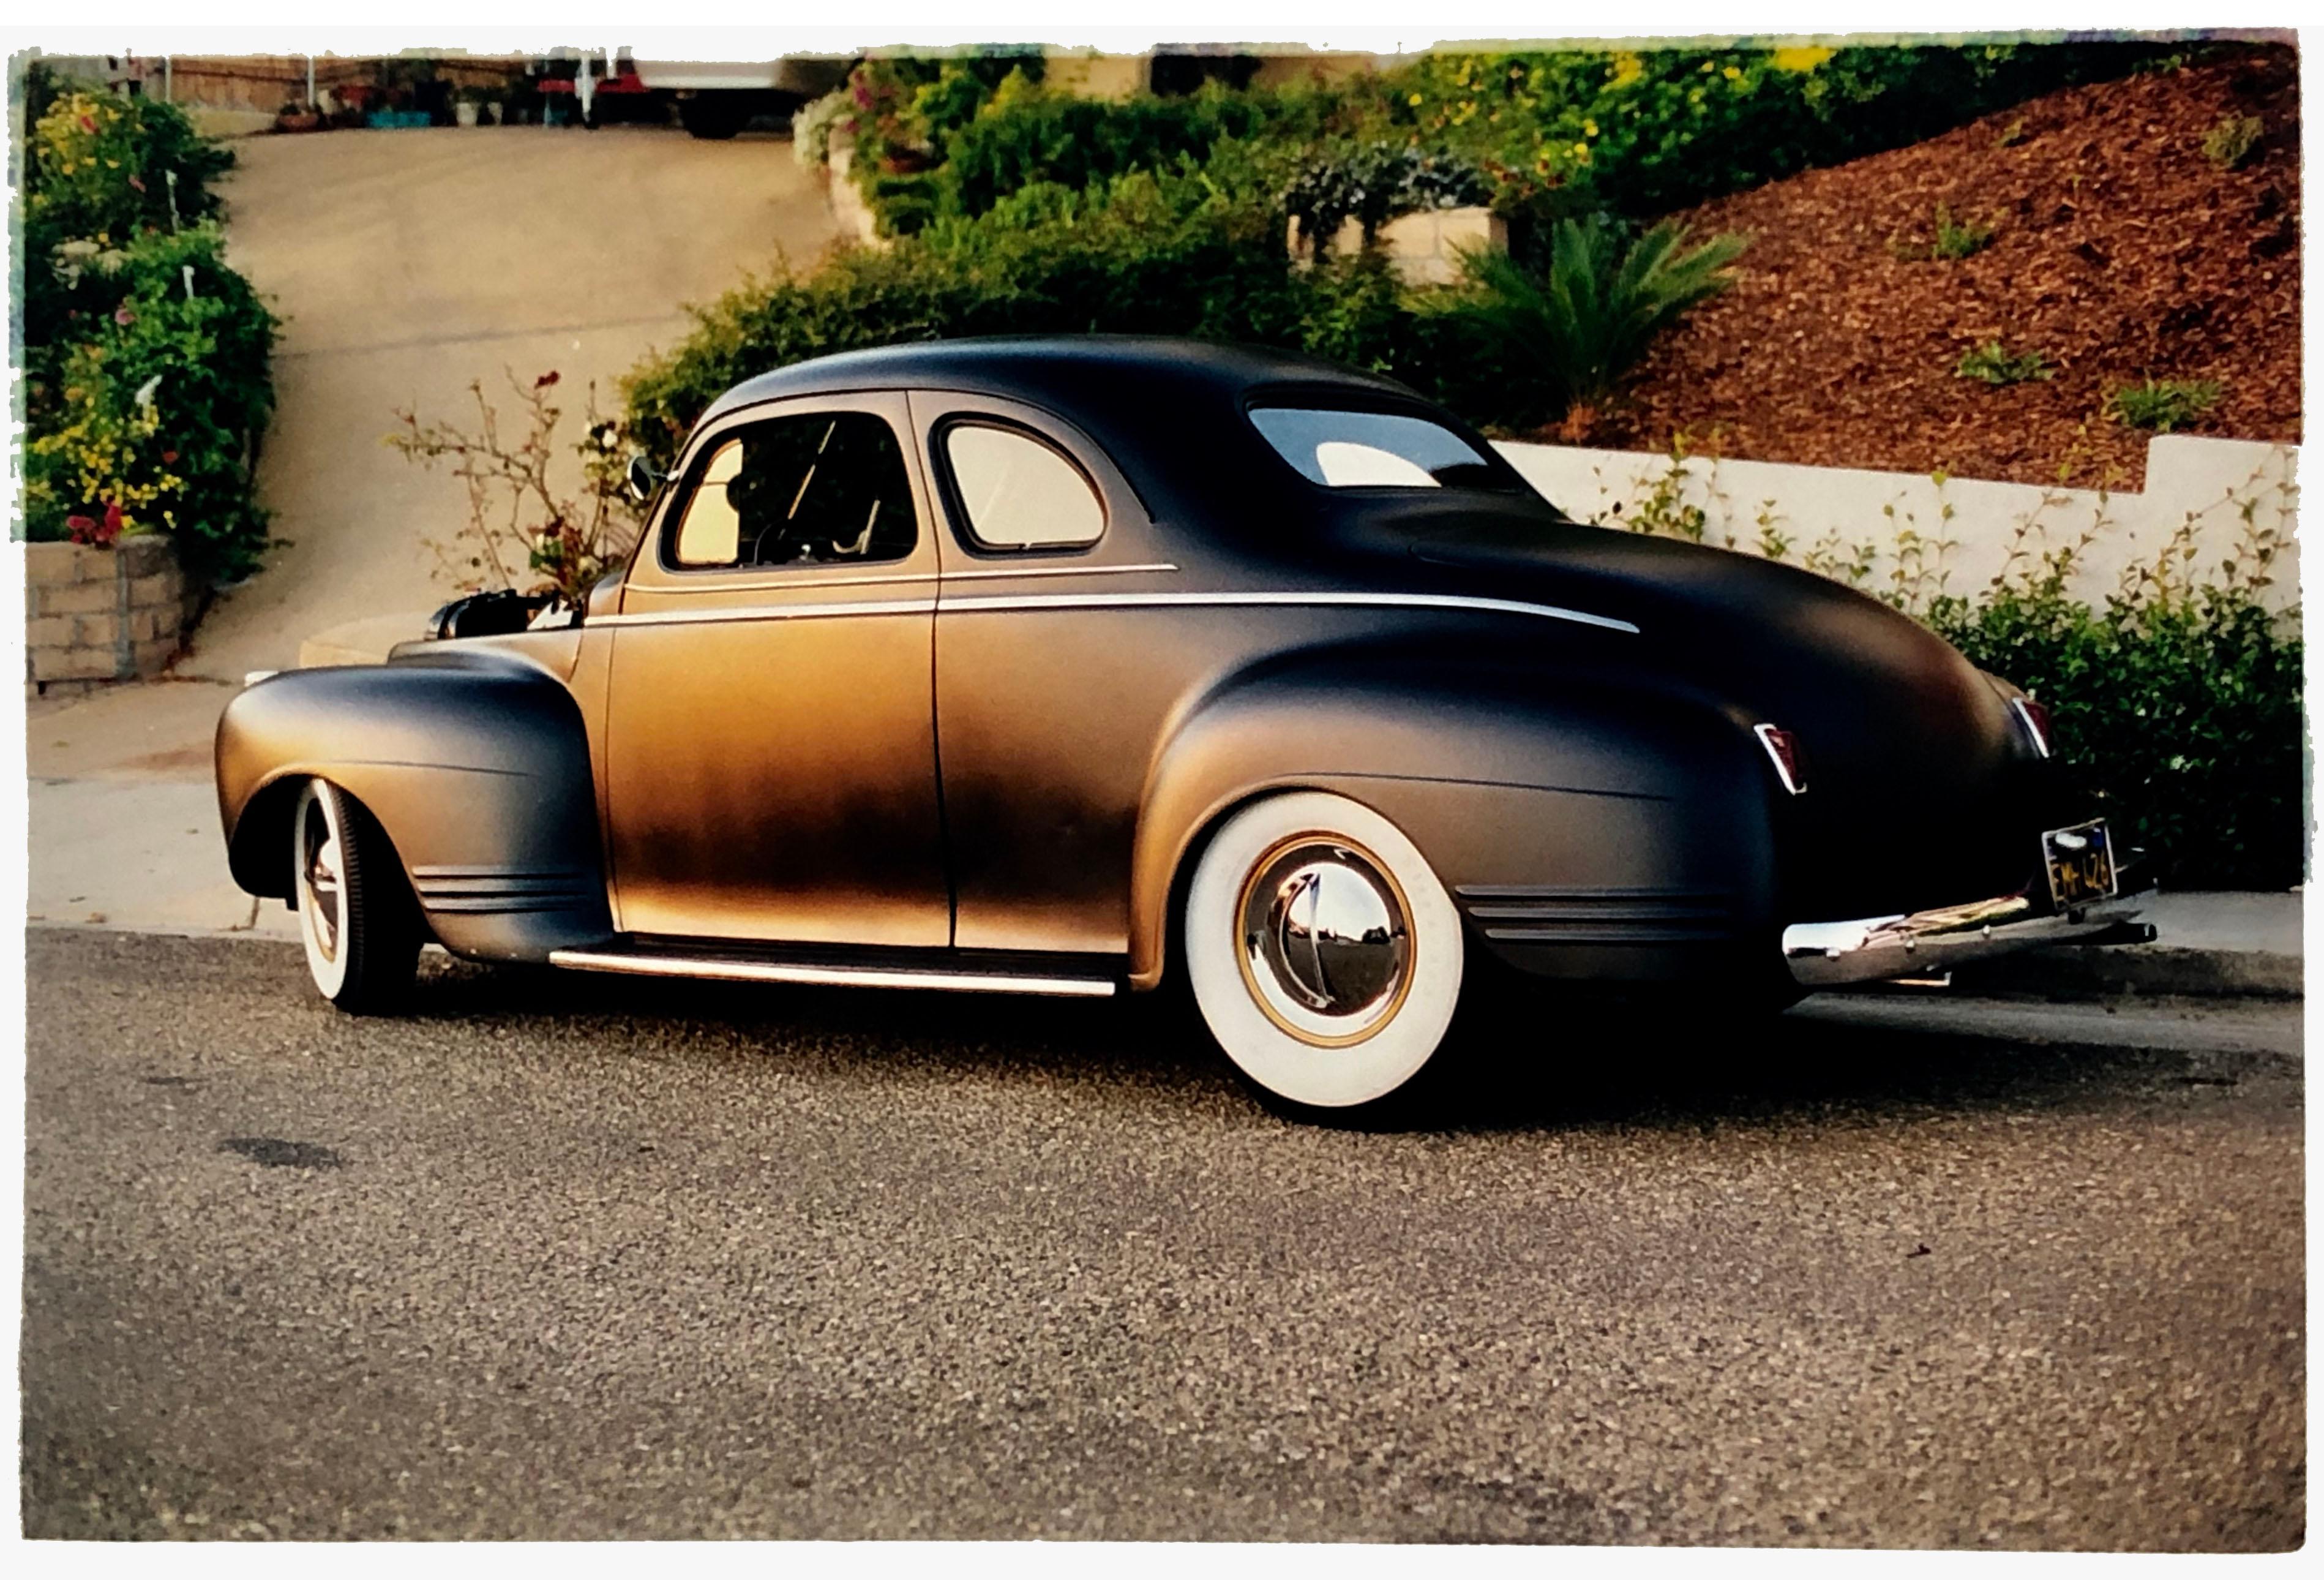 Richard Heeps Color Photograph - Shelly's '41 Plymouth, California - Dream in Color Series - Vintage Car Photo